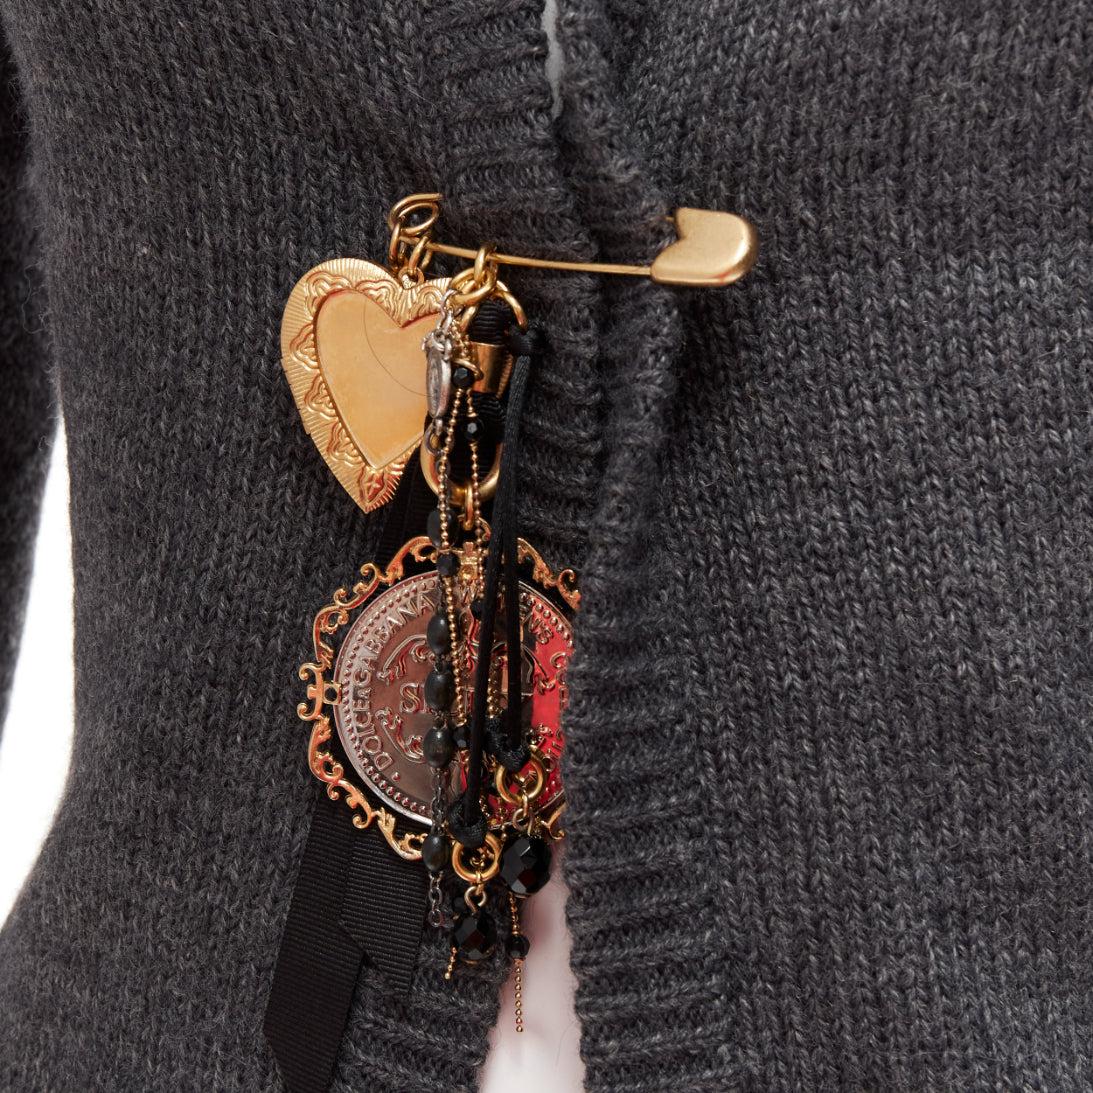 DOLCE GABBANA grey gold Sicily baroque heart ribbon charm pin cardigan IT36 XXS
Reference: CNLE/A00305
Brand: Dolce Gabbana
Designer: Domenico Dolce and Stefano Gabbana
Material: Acrylic, Mohair, Blend
Color: Grey, Gold
Pattern: Solid
Closure: